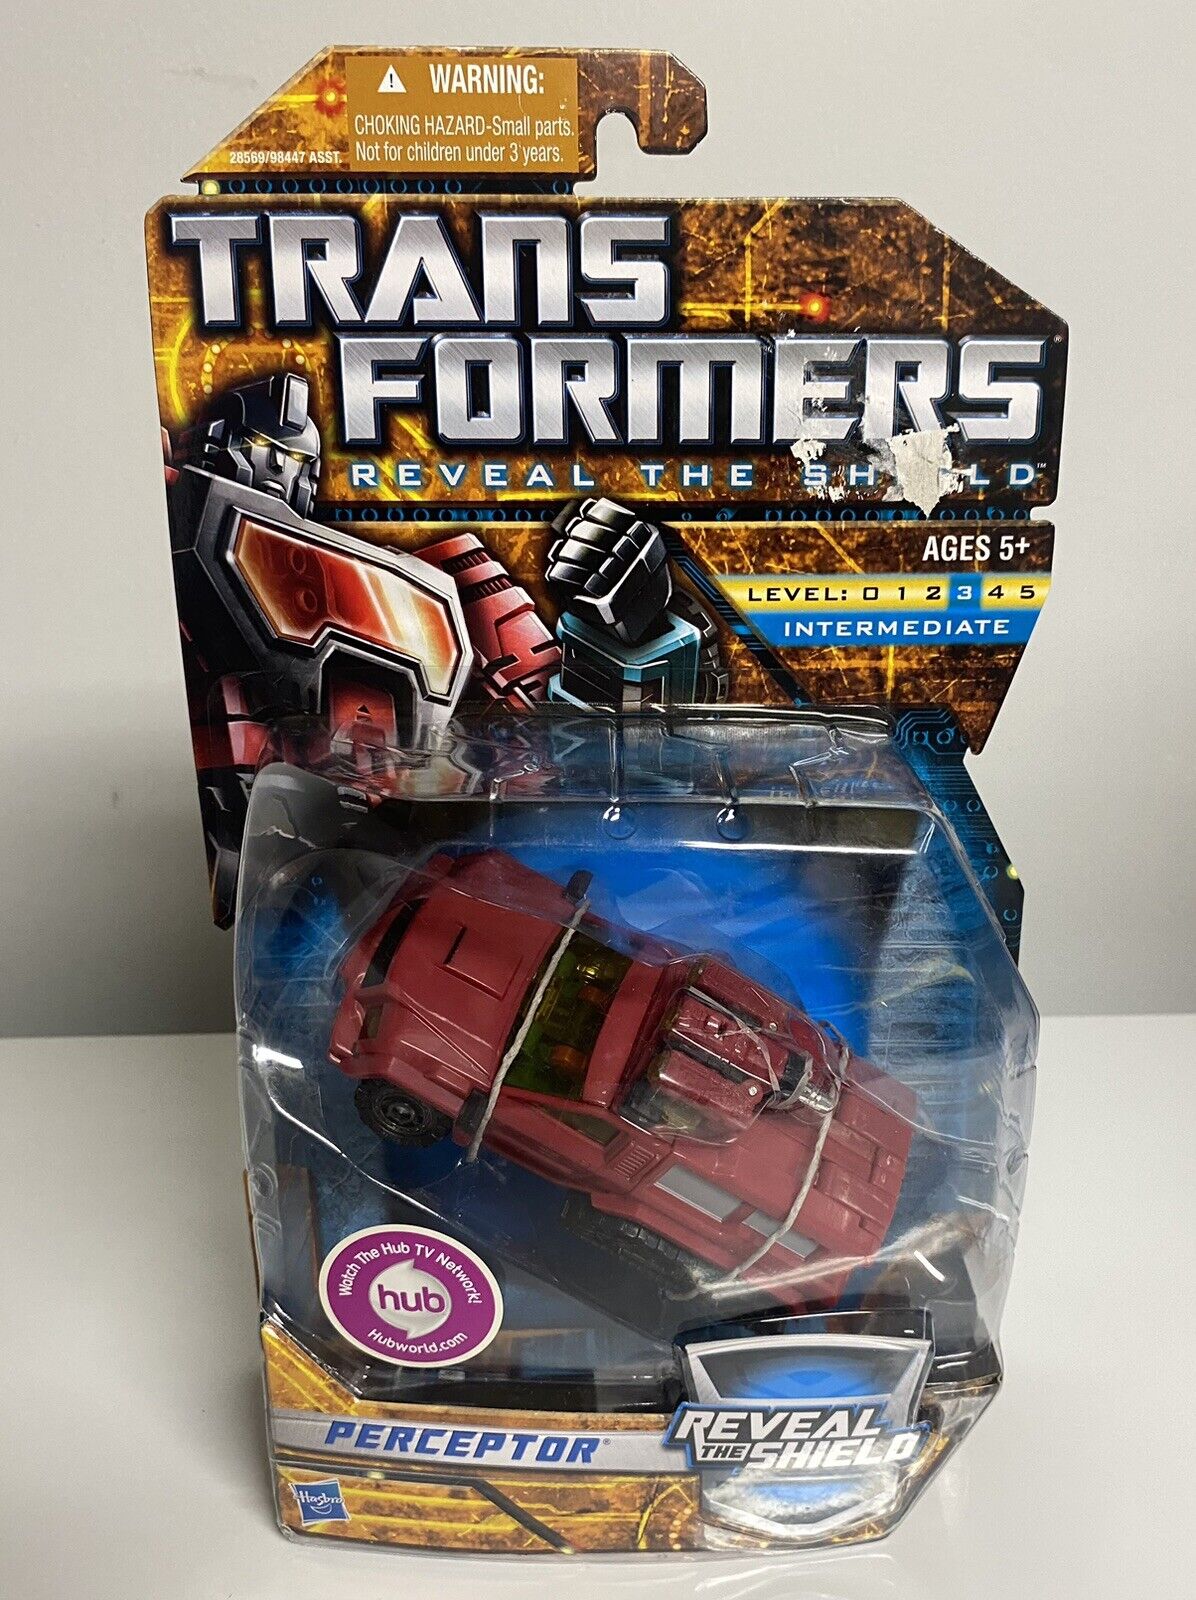 Transformers: Reveal the Shield - Perceptor Deluxe Class Action Figure - Hasbro